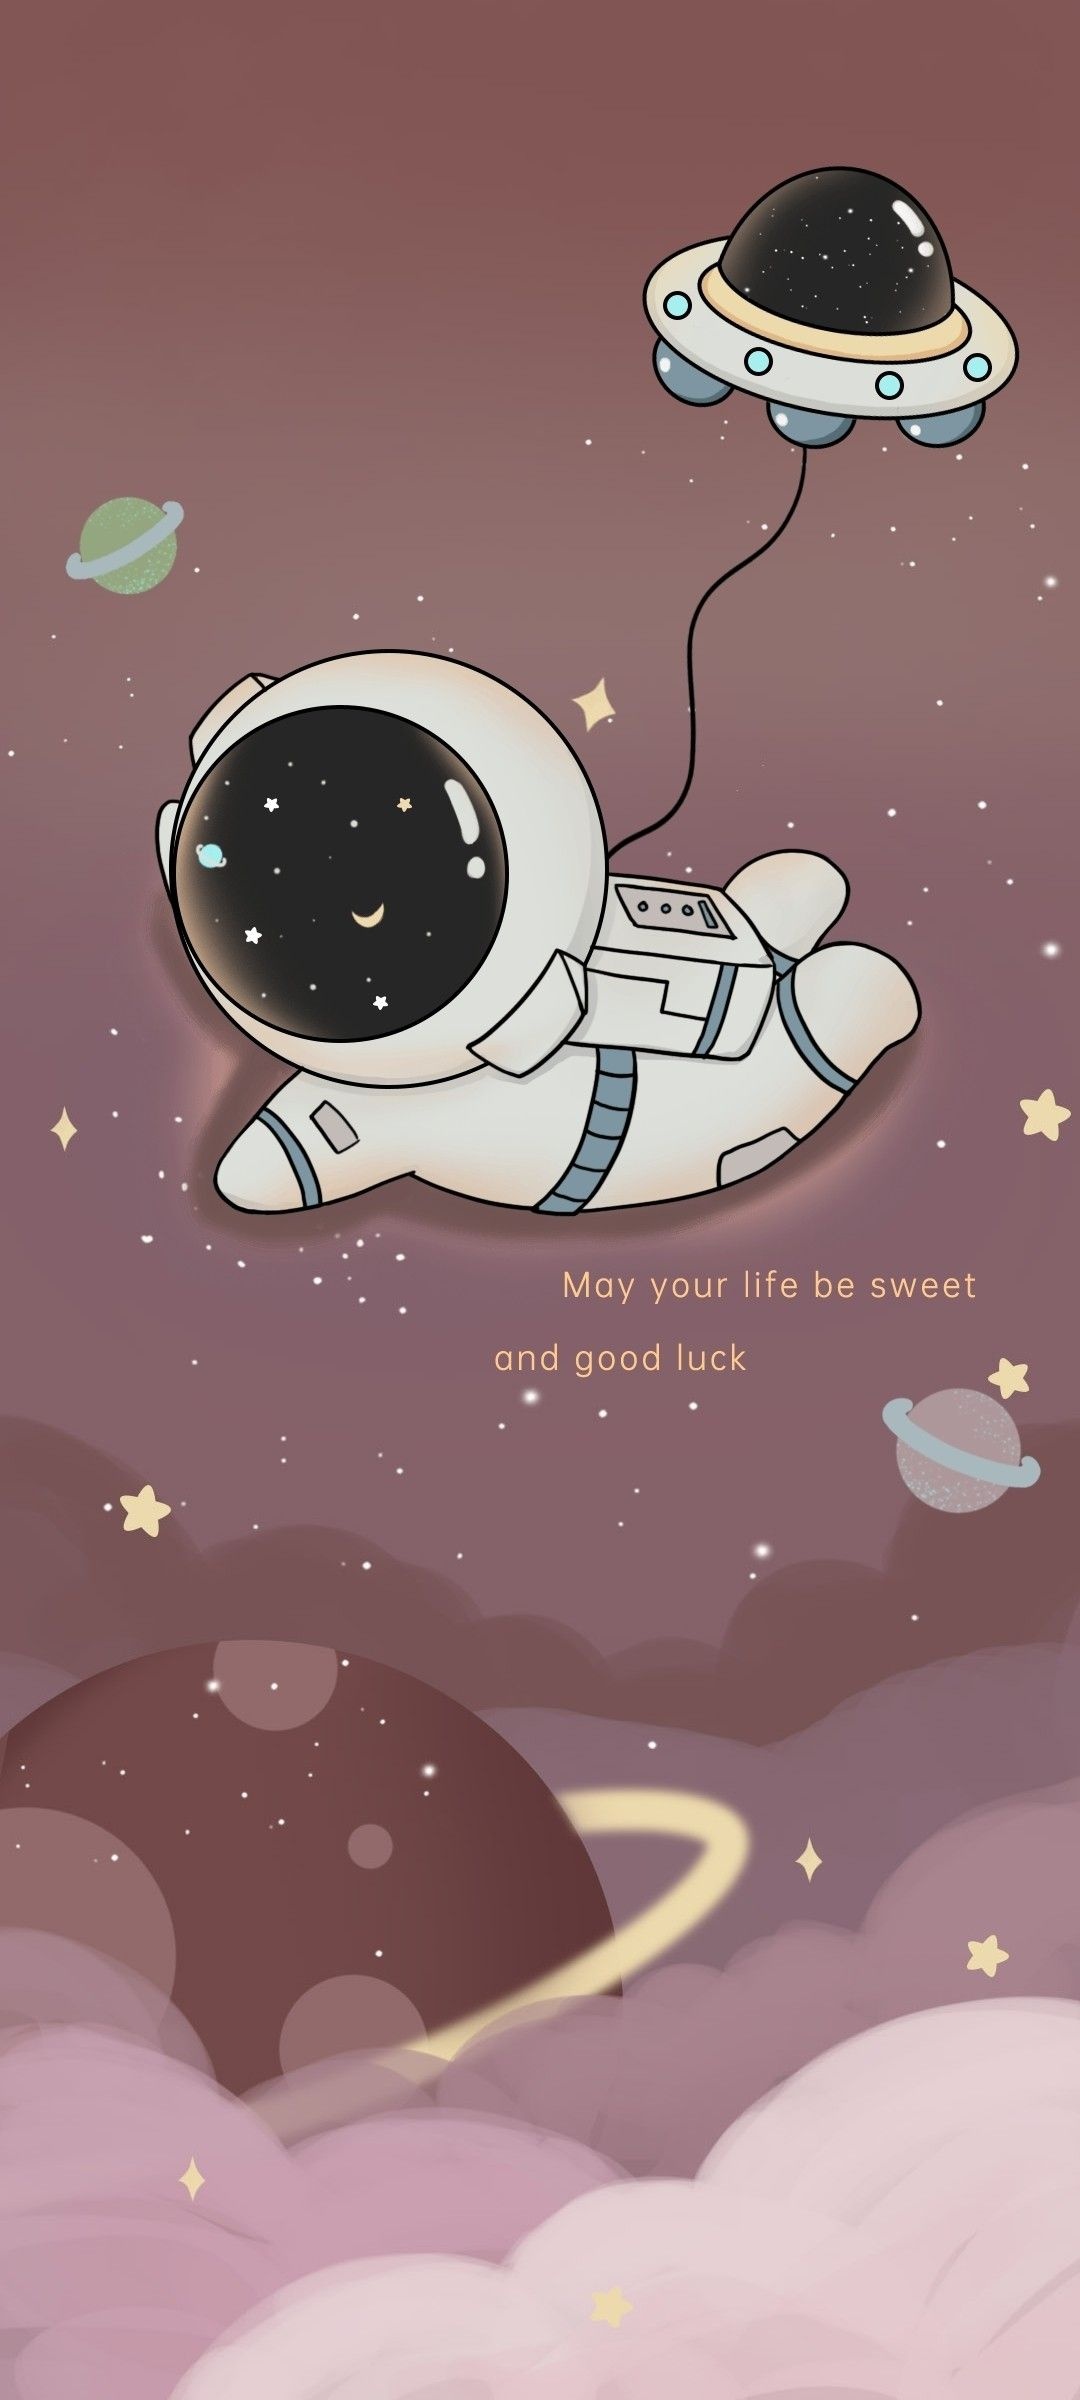 Good Luck: Wishing all the luck in the world, Fortune, Positive greetings, Blessing. 1080x2400 HD Background.